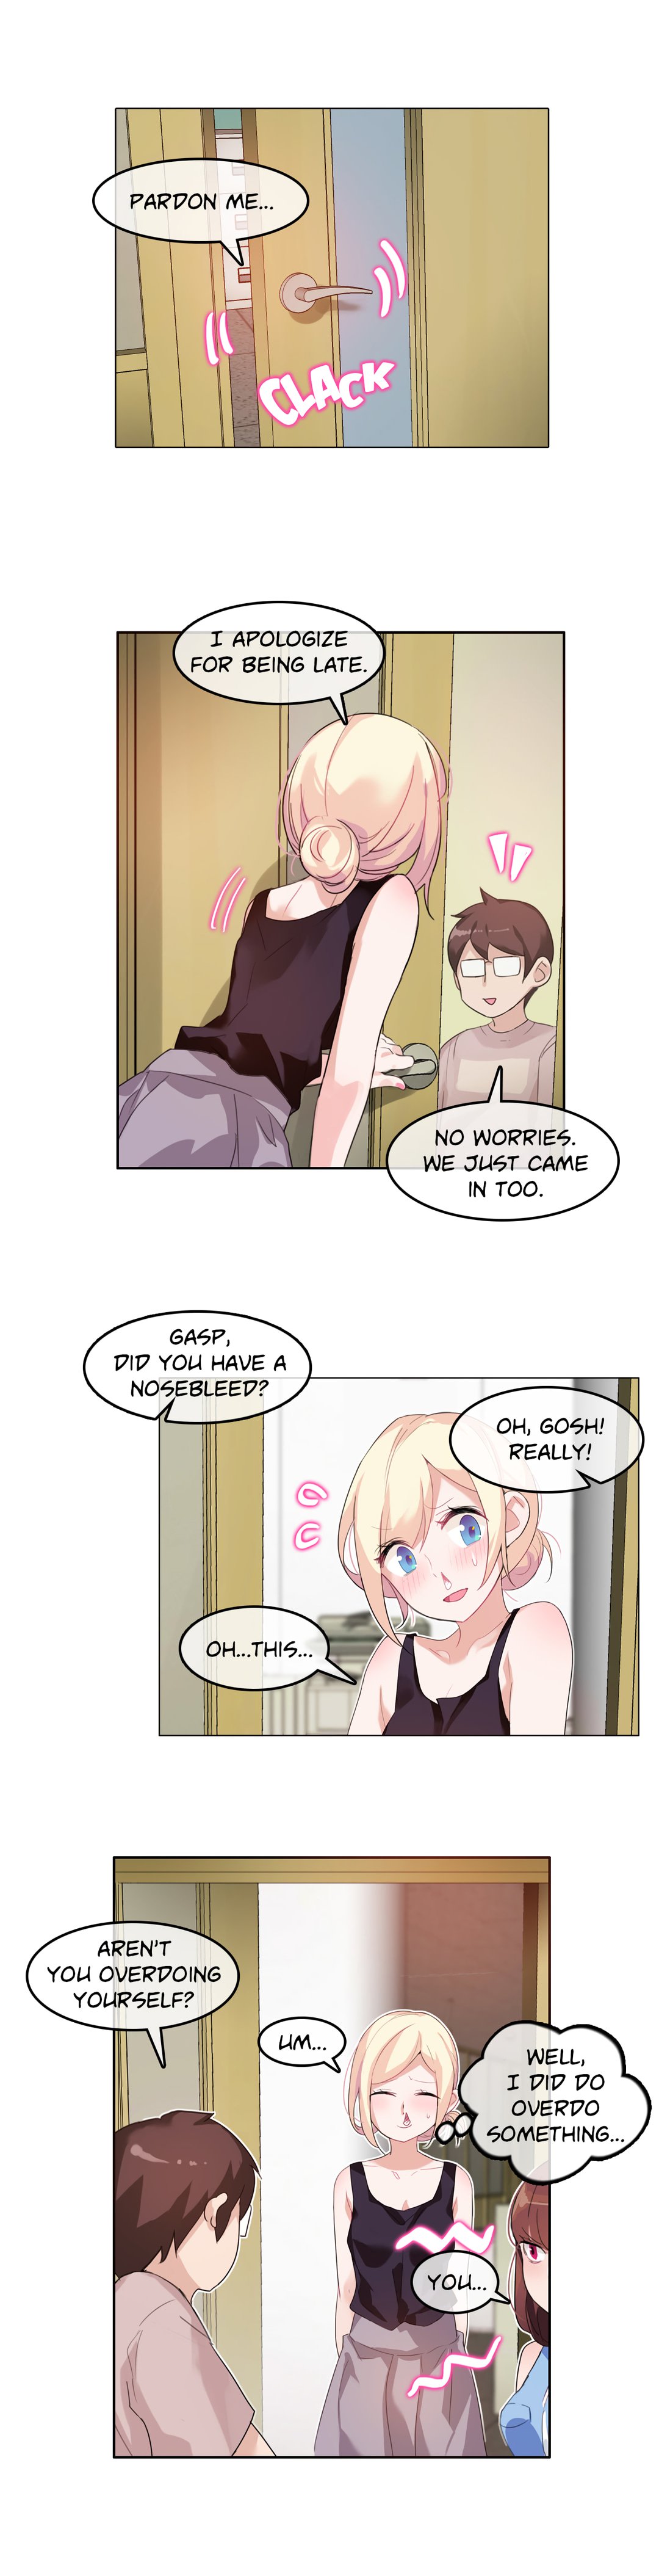 A Pervert's Daily Life - 6 page 1